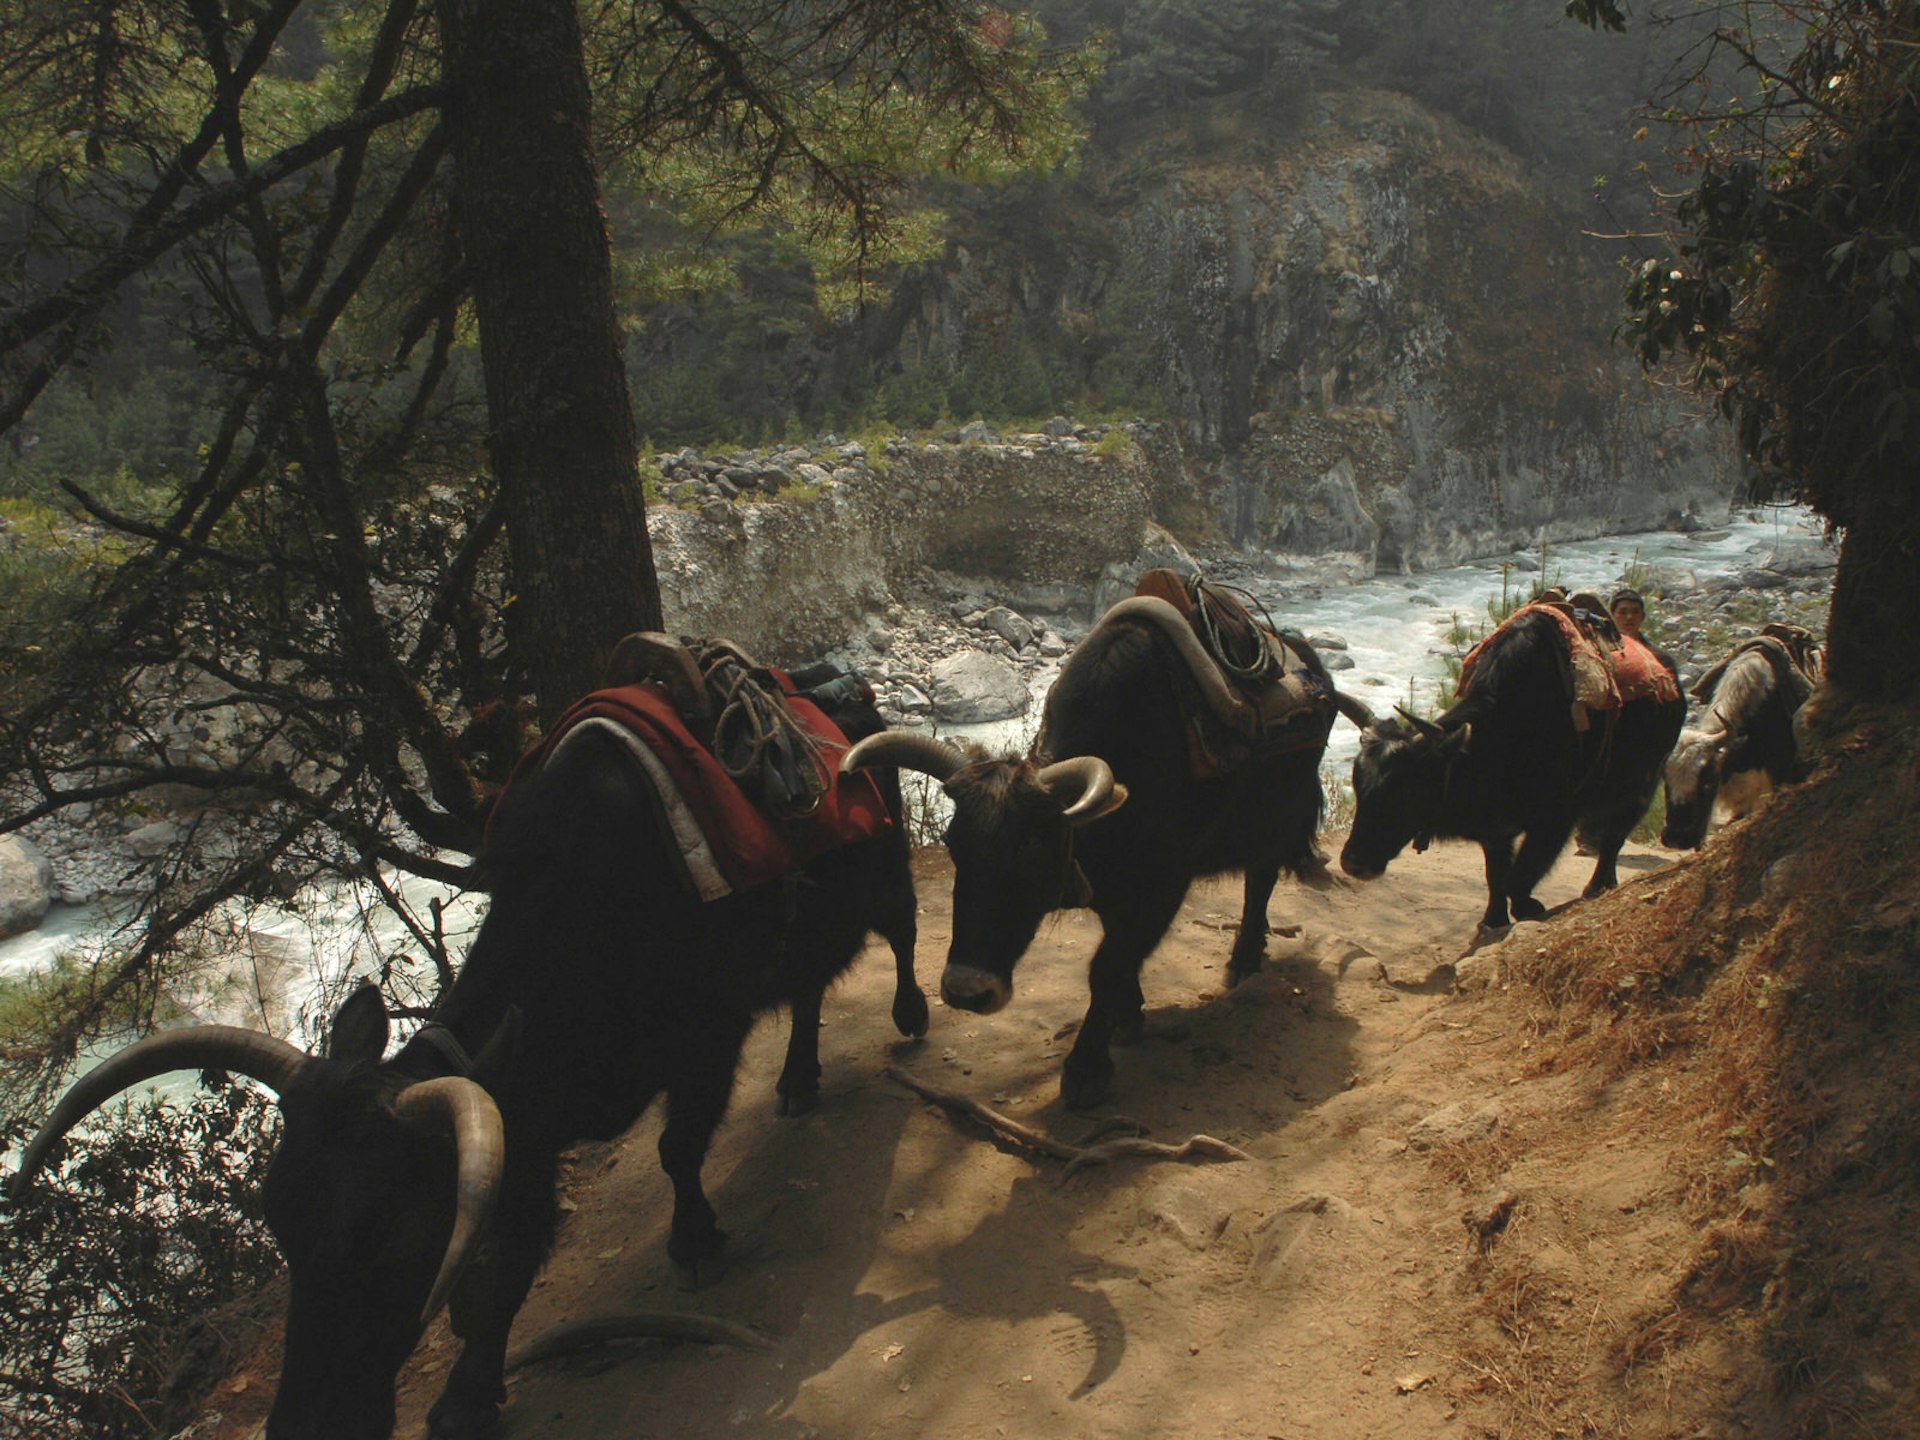 Yak and dzo trains are a common sight on the trails through Solukhumbu © Joe Bindloss / Lonely Planet